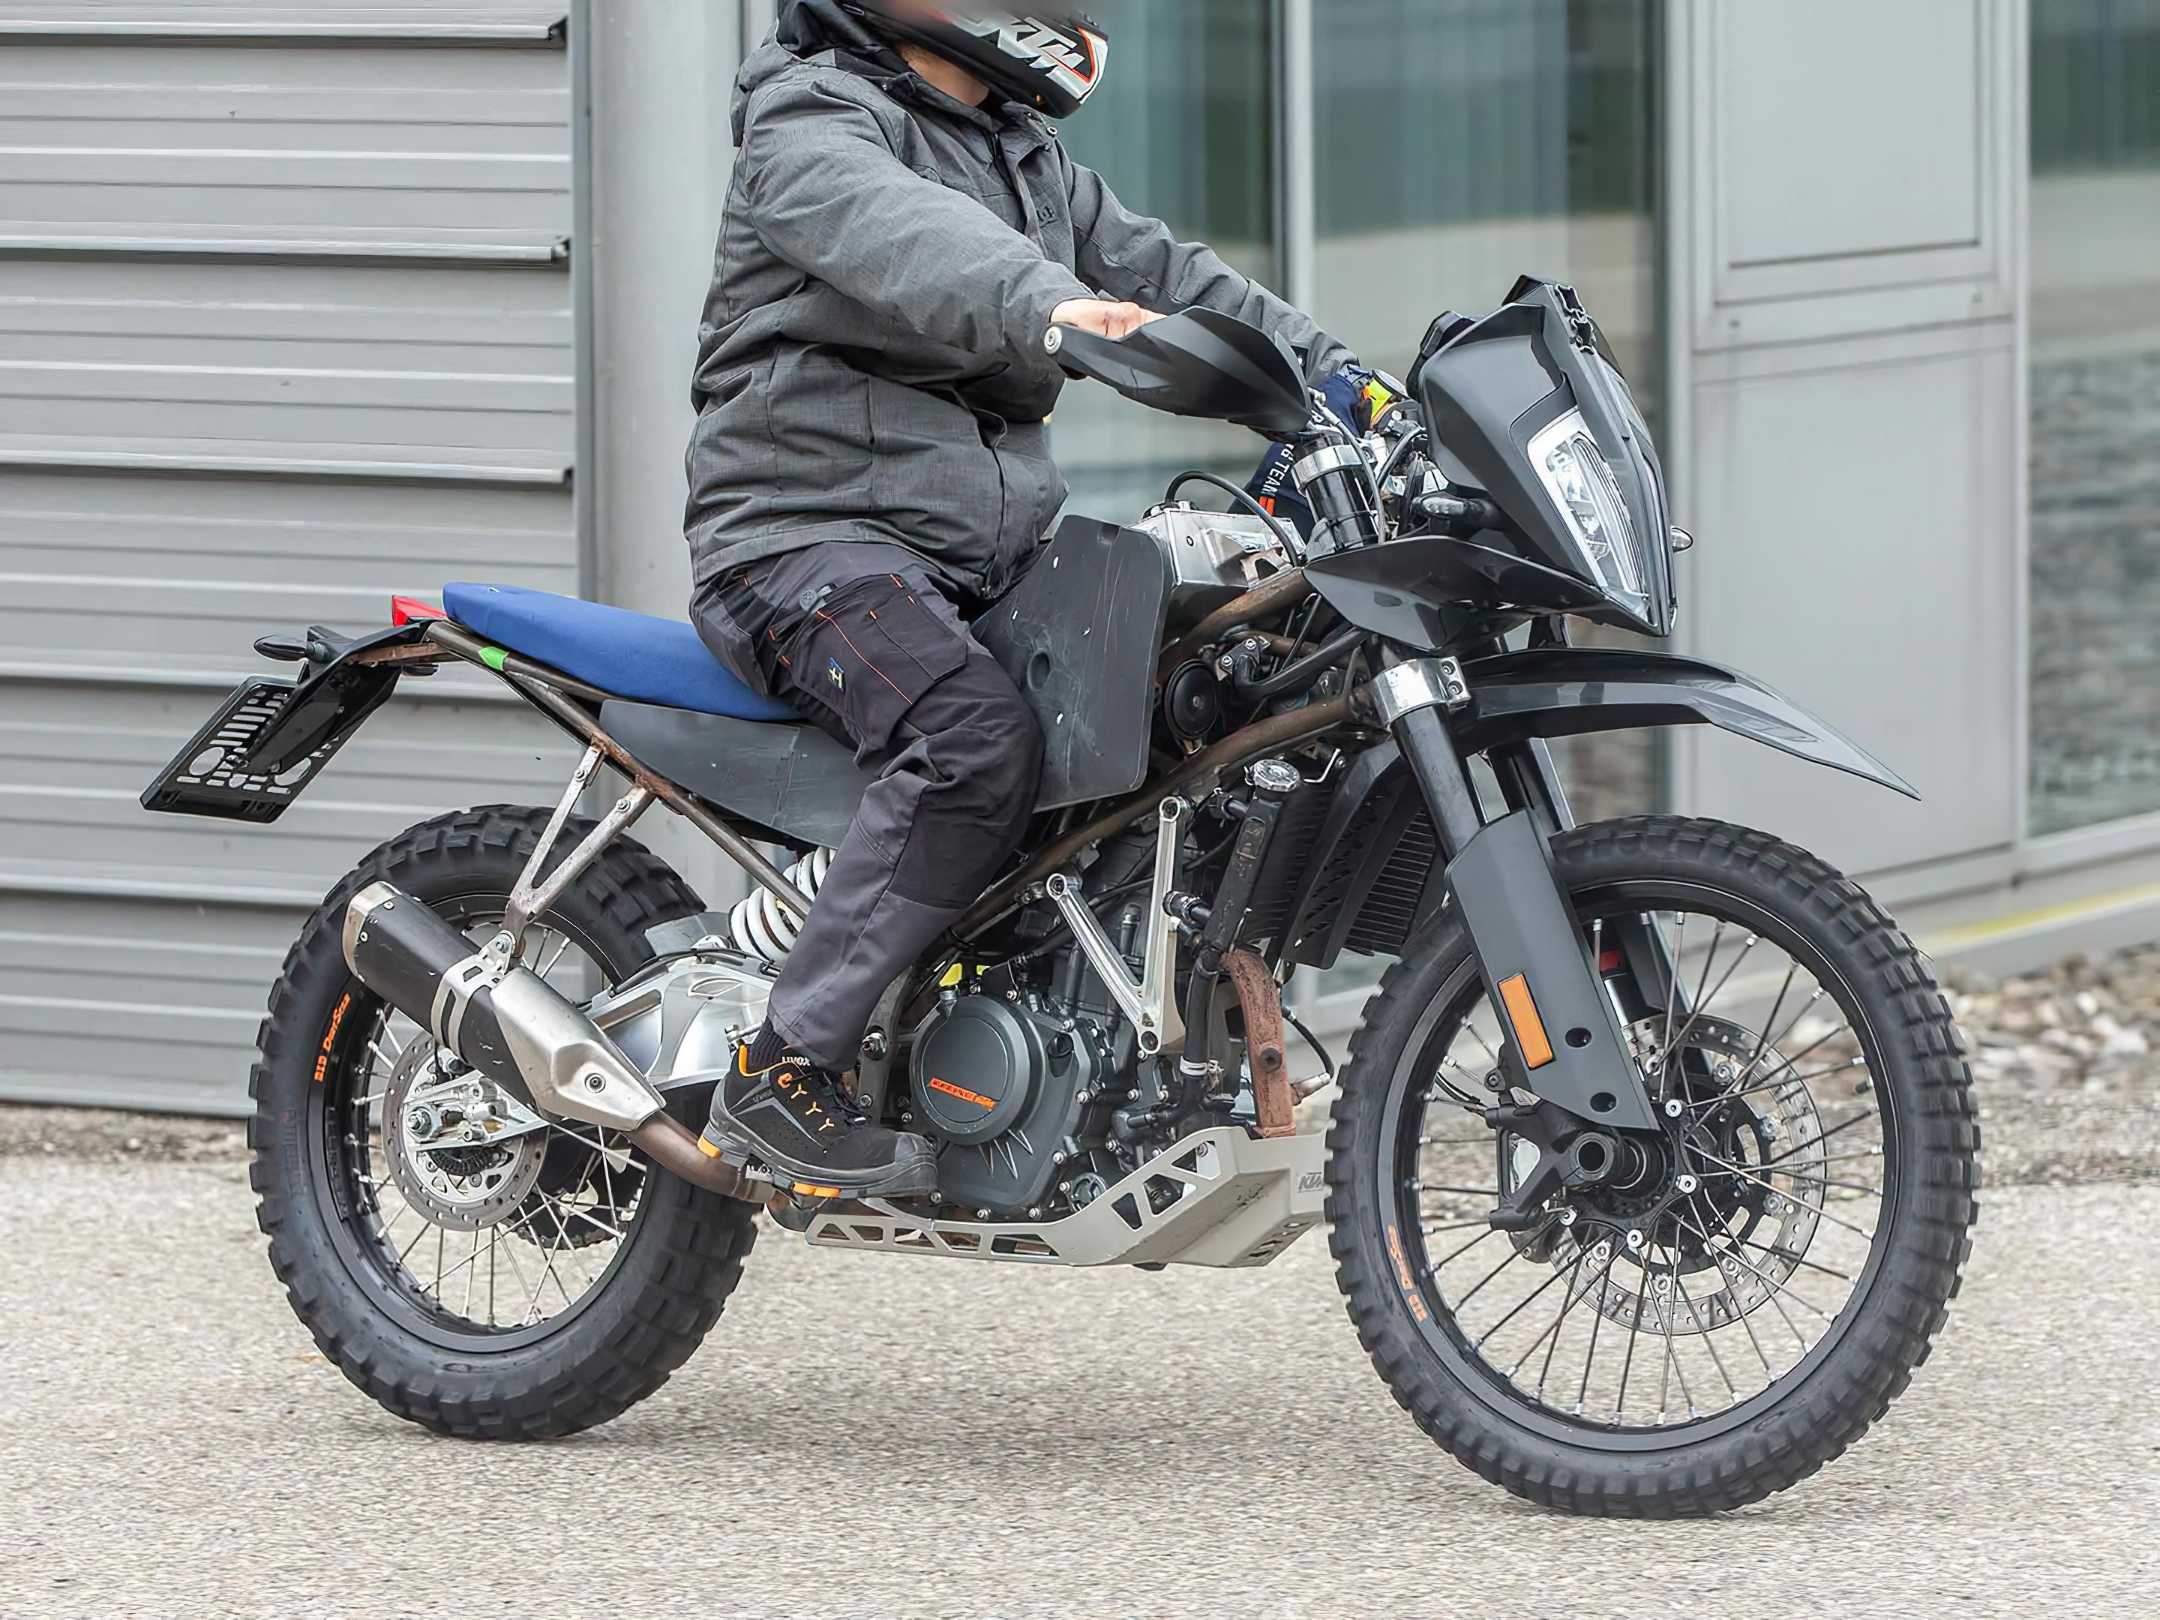 KTM 390 Adventure spotted with more off-road capability
- also in the MOTORCYCLES.NEWS APP